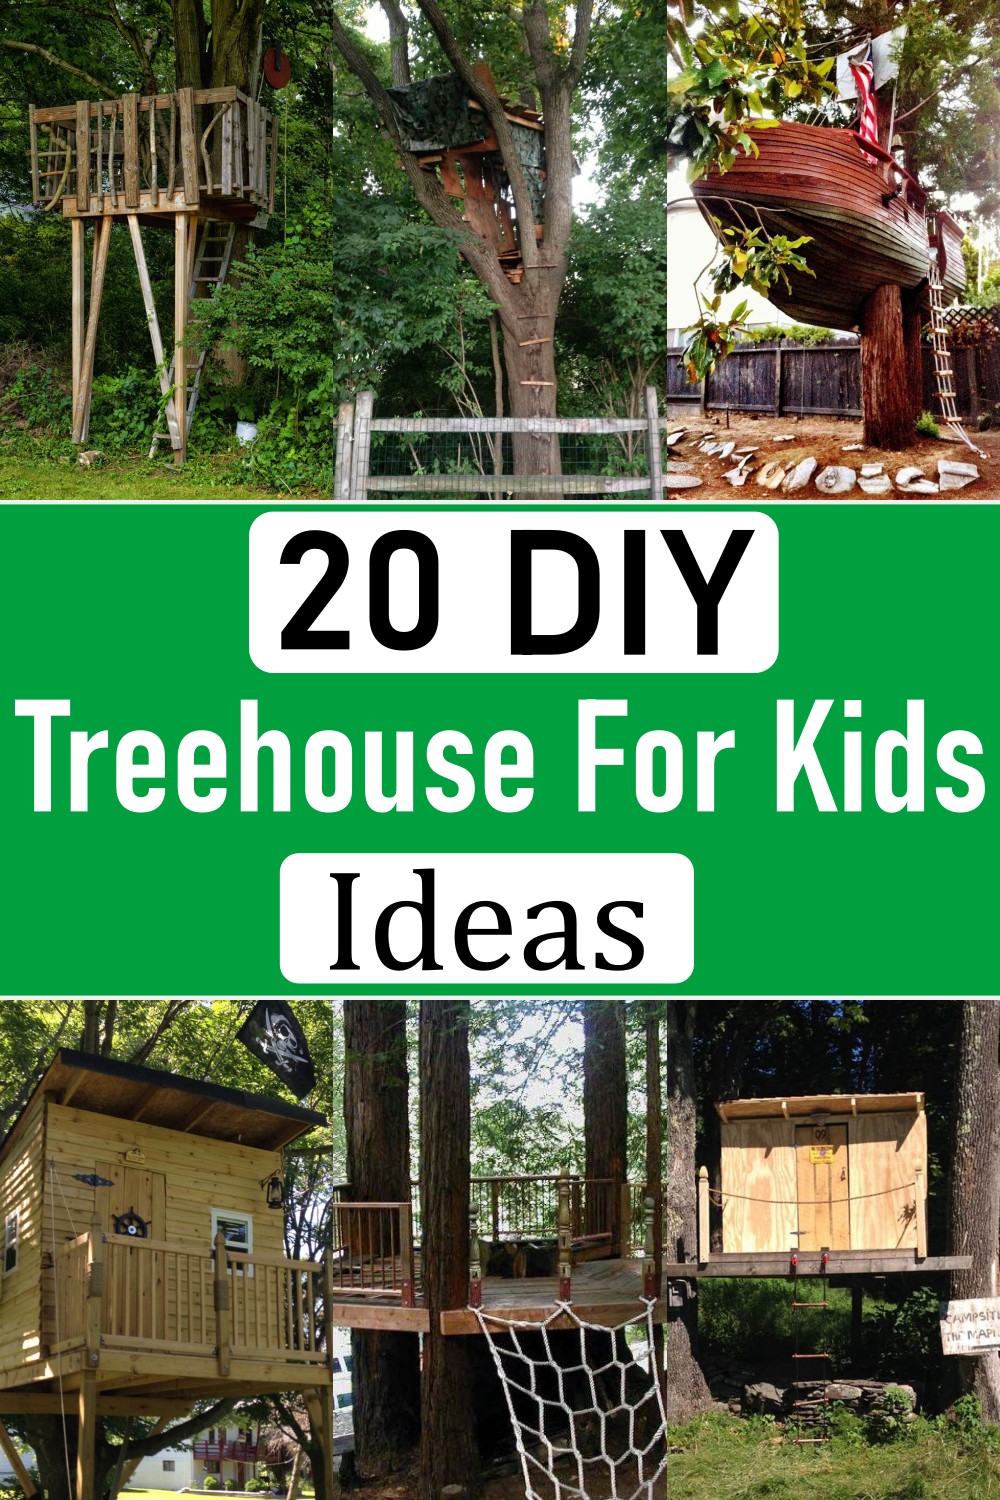  Treehouse For Kids